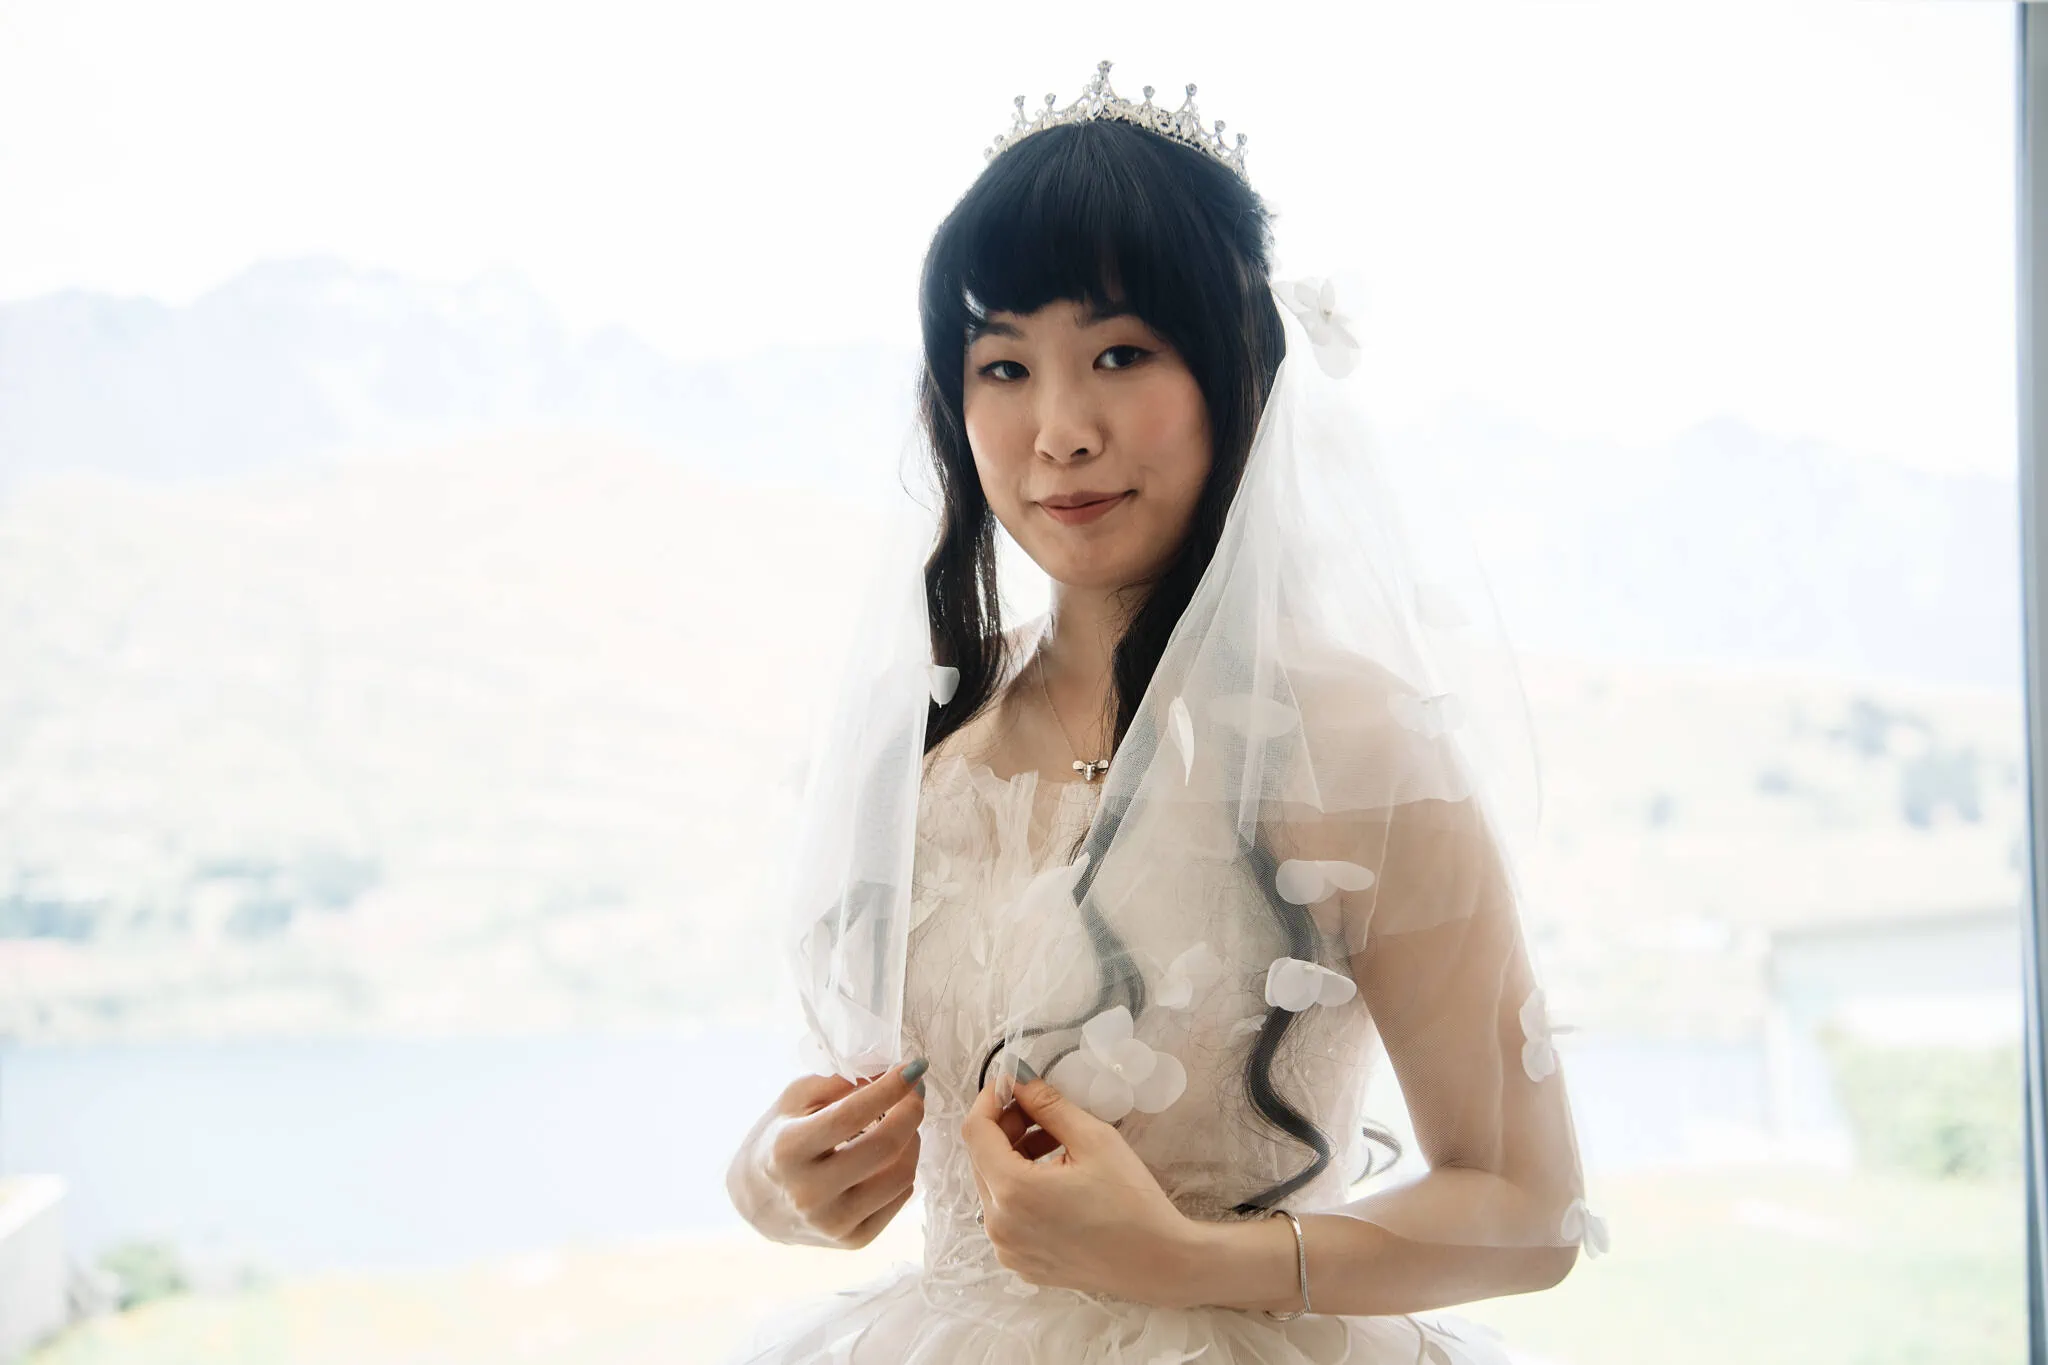 Carlos and Wanzhu's intimate Cecil Peak Heli Elopement Wedding, with a bride in a wedding dress posing in front of a window.